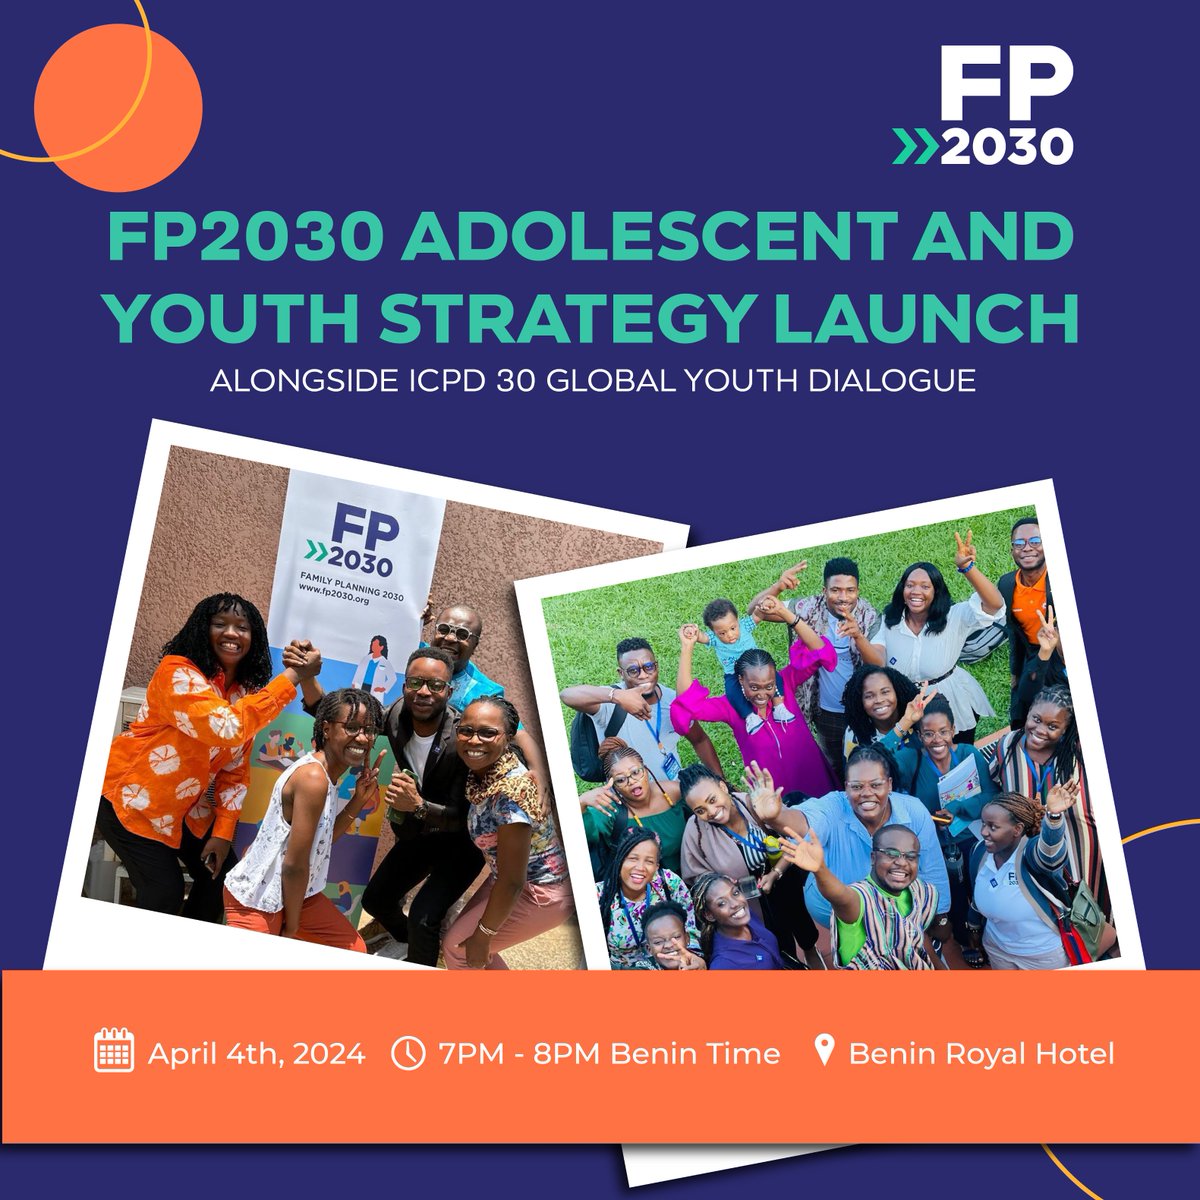 Calling all advocates for youth empowerment! 📢 Join us for the launch of our FP2030 Adolescent and Youth Strategy on April 4th at 7 pm/1:00pm ET. Let's pave the way for informed decisions and prioritize youth rights! #ICPD30 bit.ly/3VIYMg1